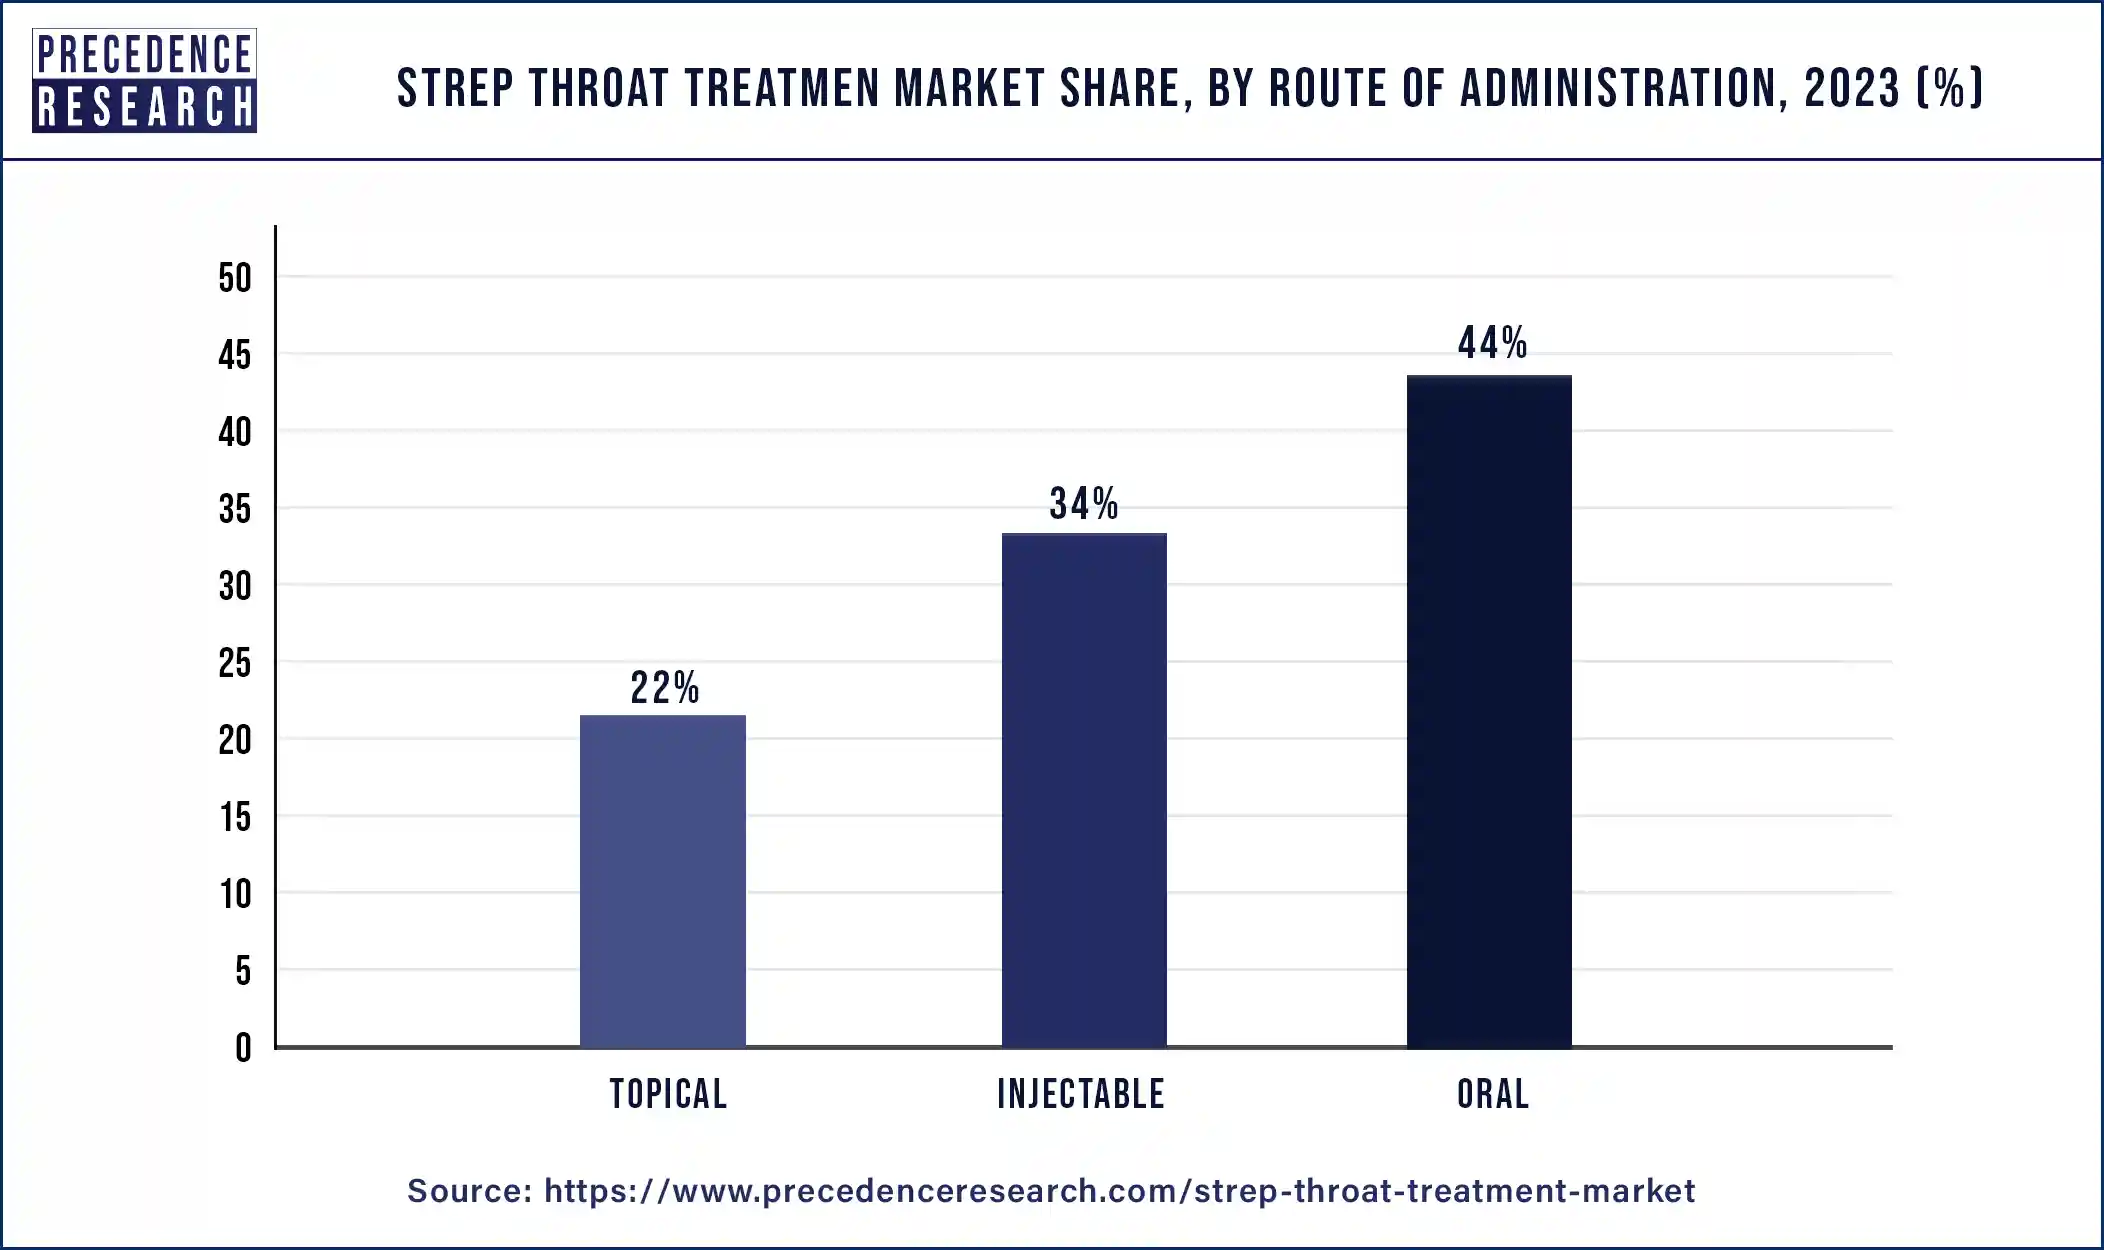 Strep Throat Treatmen Market Share, By Route of Administration, 2023 (%)